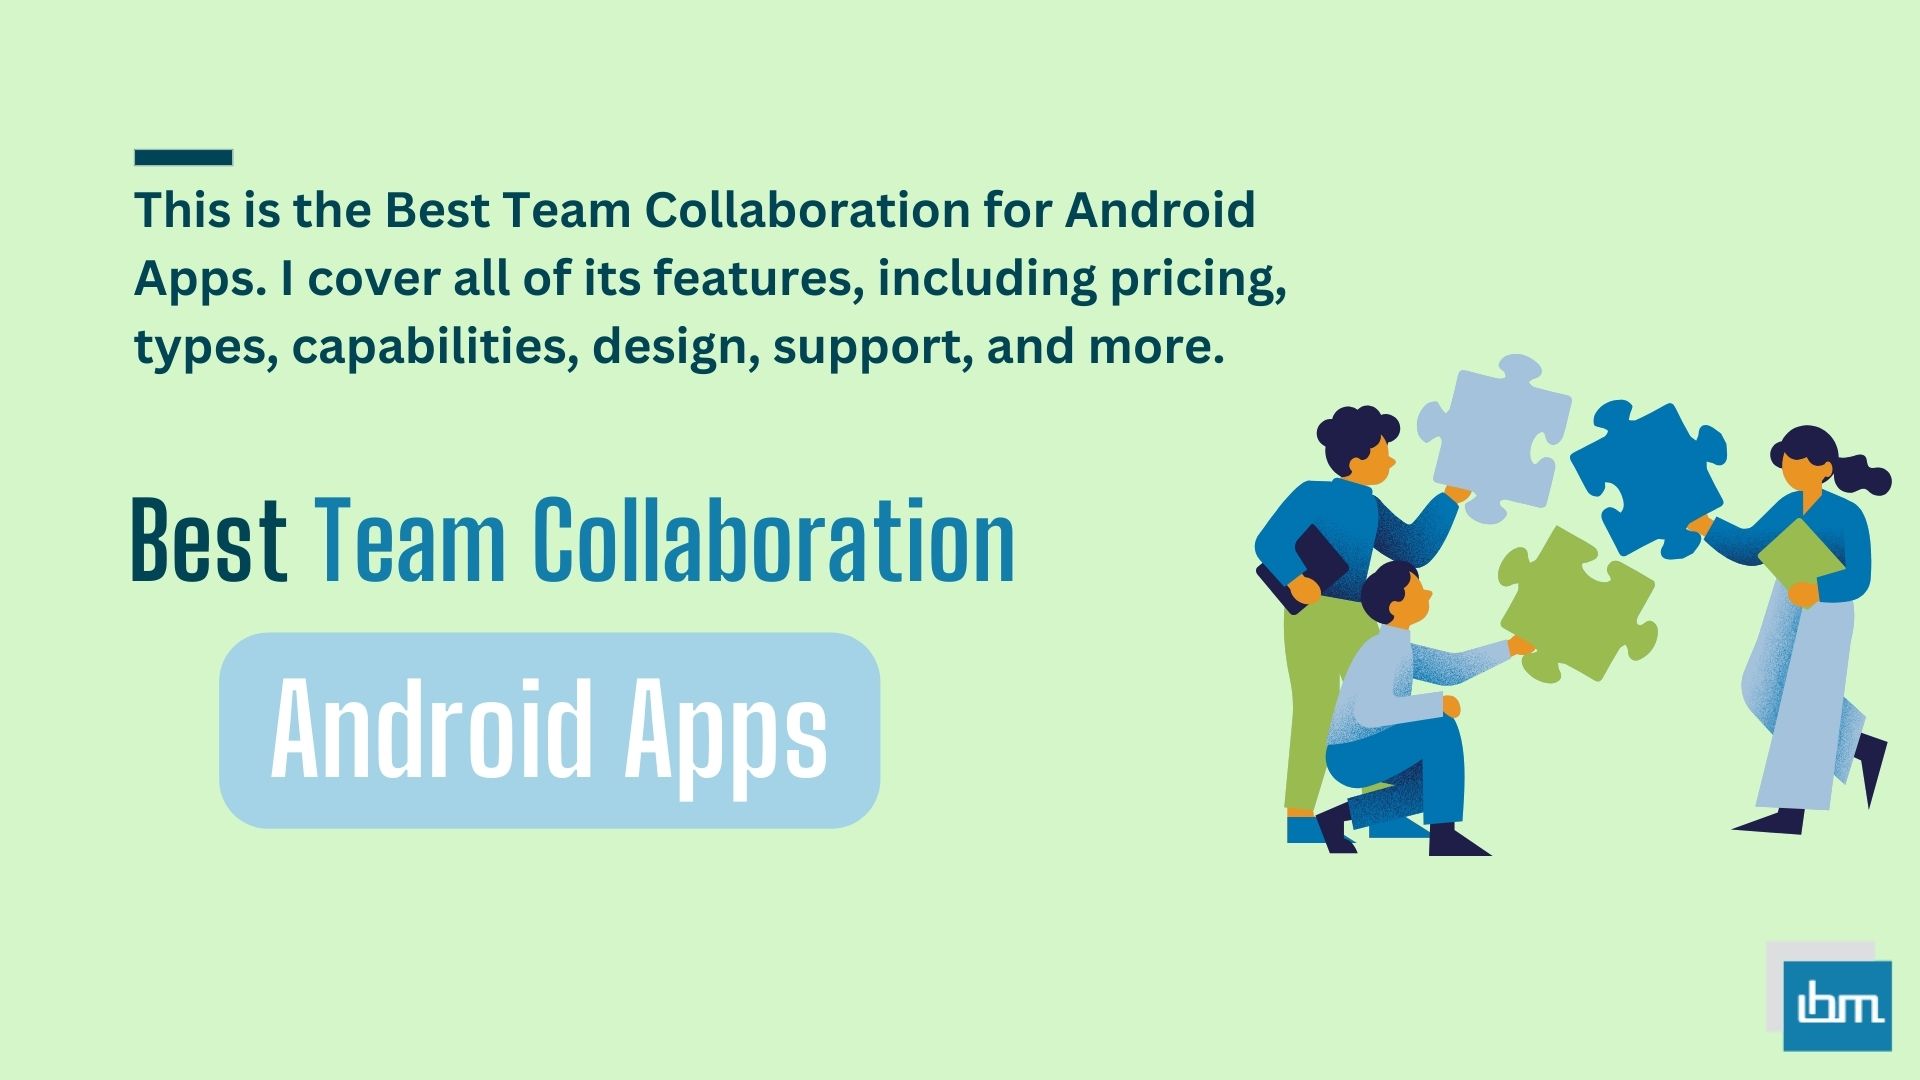 Best Team Collaboration for Android Apps